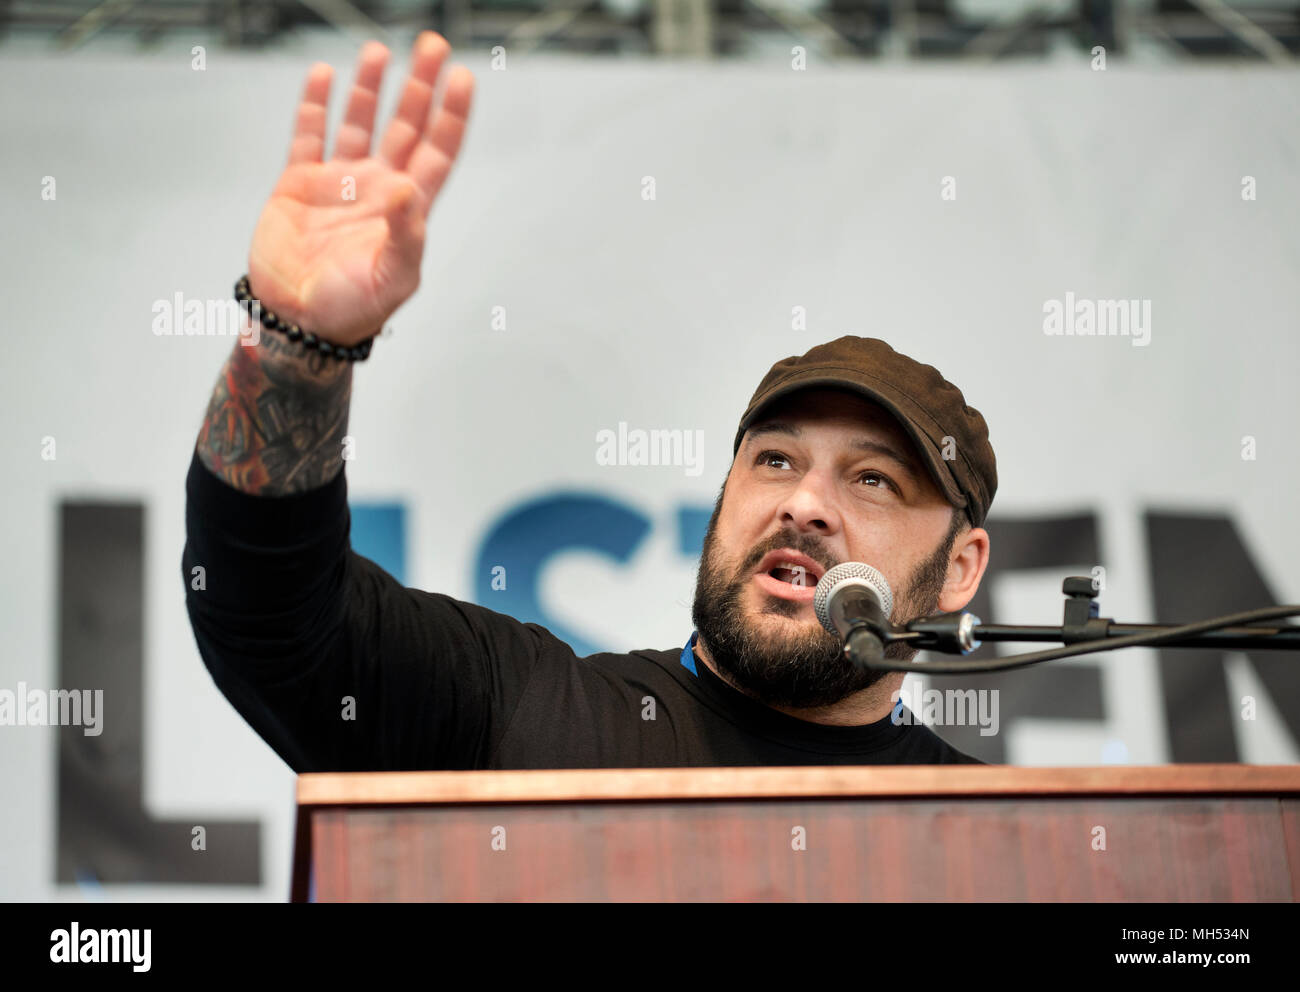 4-21-2018, SPRINT Pavilion, Charlottesville, VA, USA.  Former white supremacist and author Christian Picciolini speaking during Listen First in Charlottesville.  Listen First was part of the first National Week of Conversation (April 20-28, 2018).  Listen First’s weekend events in Charlottesville were created to support healing and reconciliation after 2017 white supremacist and pro-confederacy protests left one woman dead and a community divided.  A small number of seats of the 3,500 seat amphitheater were occupied on Saturday as speakers and panel discussions were presented. Stock Photo